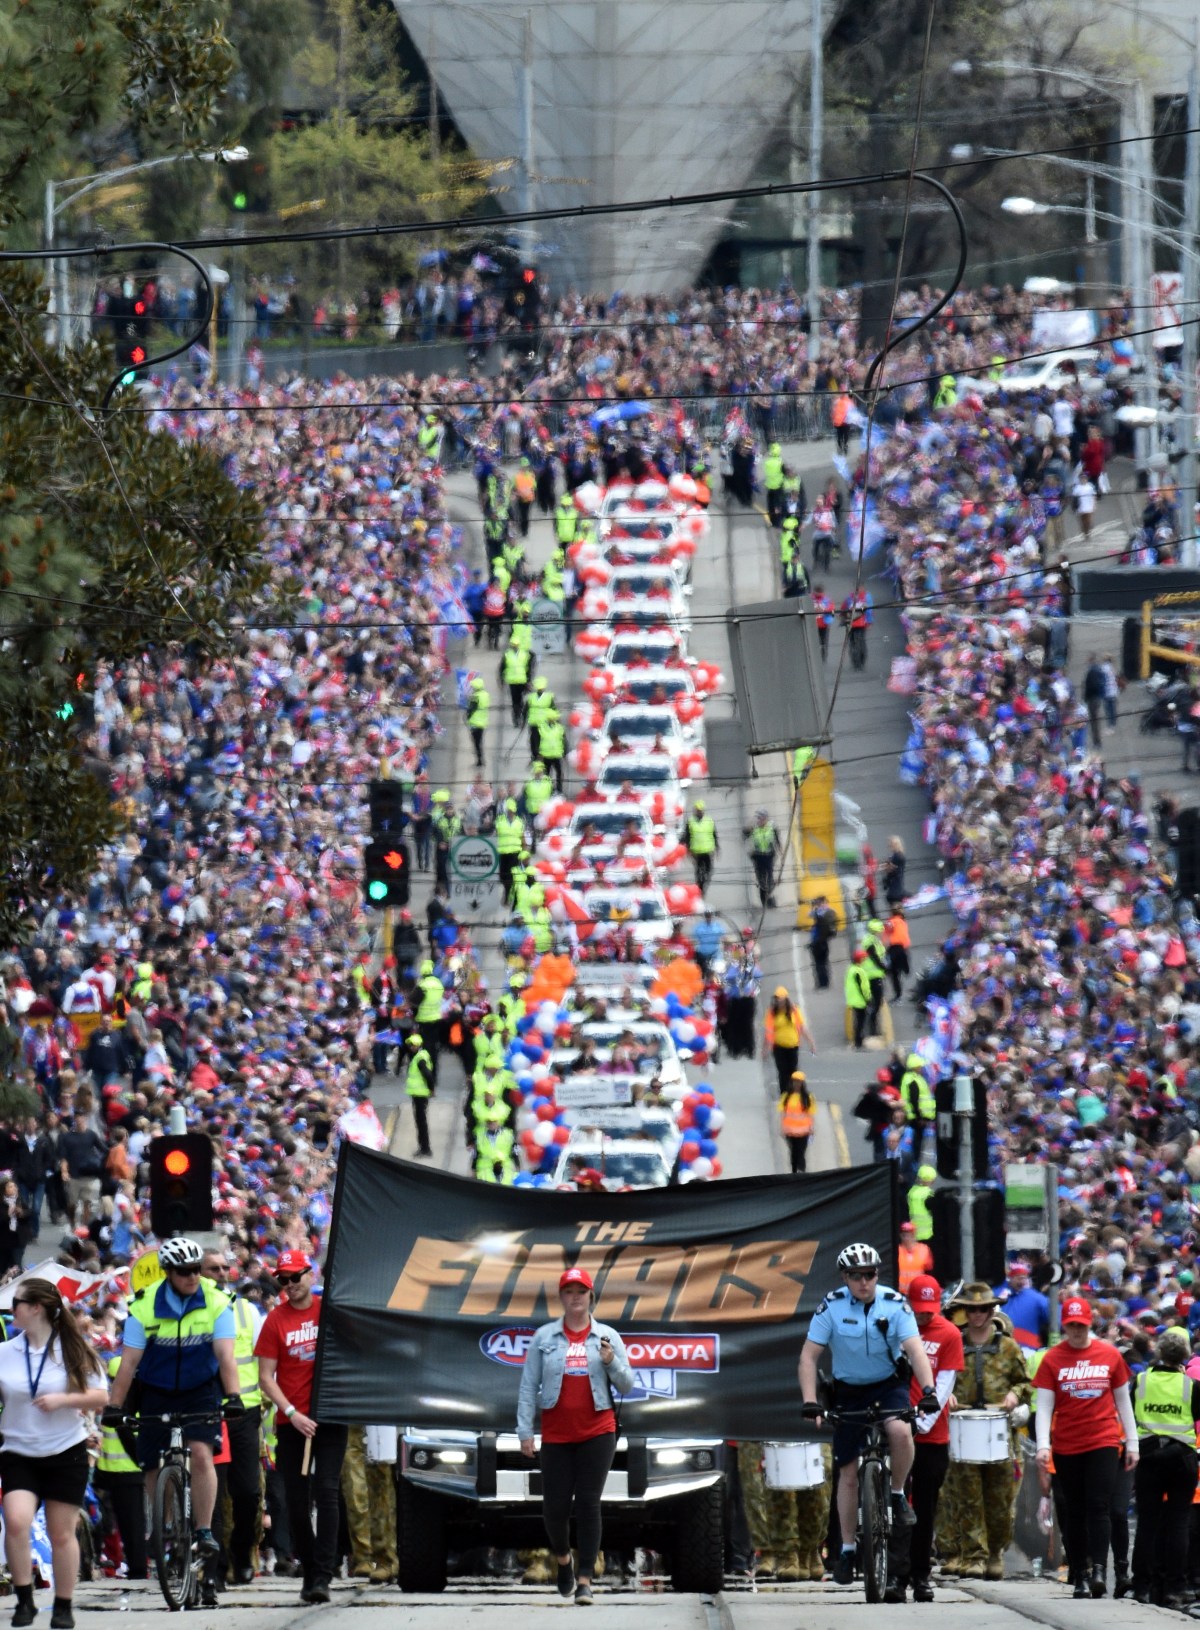 Fans gather along Wellington Parade for of the AFL Grand Final Parade in Melbourne, Friday, Sept. 30, 2016. (AAP Image/Julian Smith) NO ARCHIVING